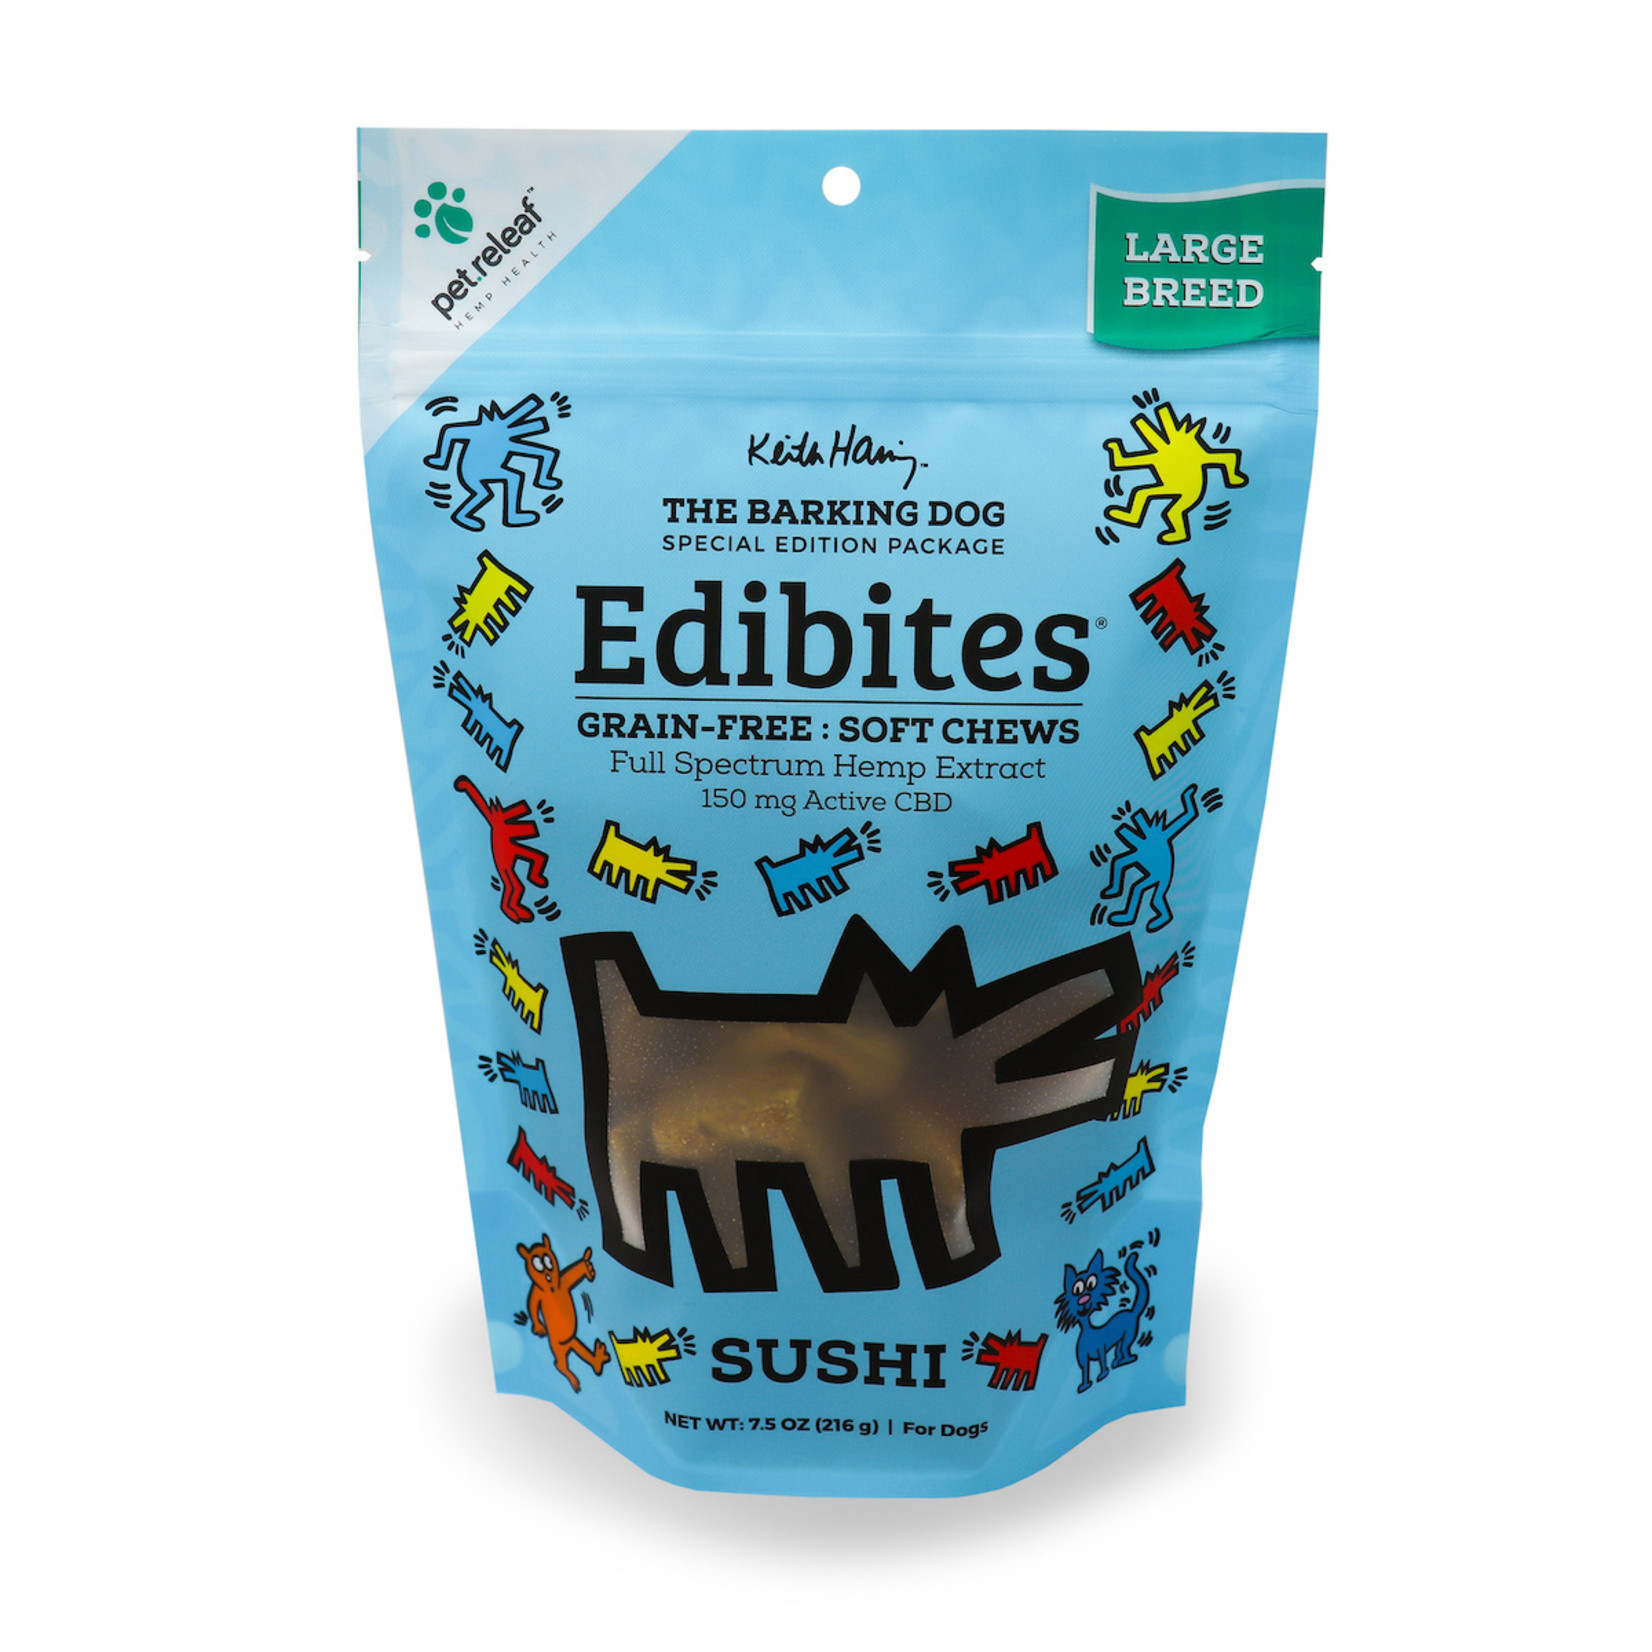 Pet Releaf Hemp Health Pet Releaf Hemp Health The Barking Dog Collection - Edibites Sushi Soft Chews for Large Breed Dogs